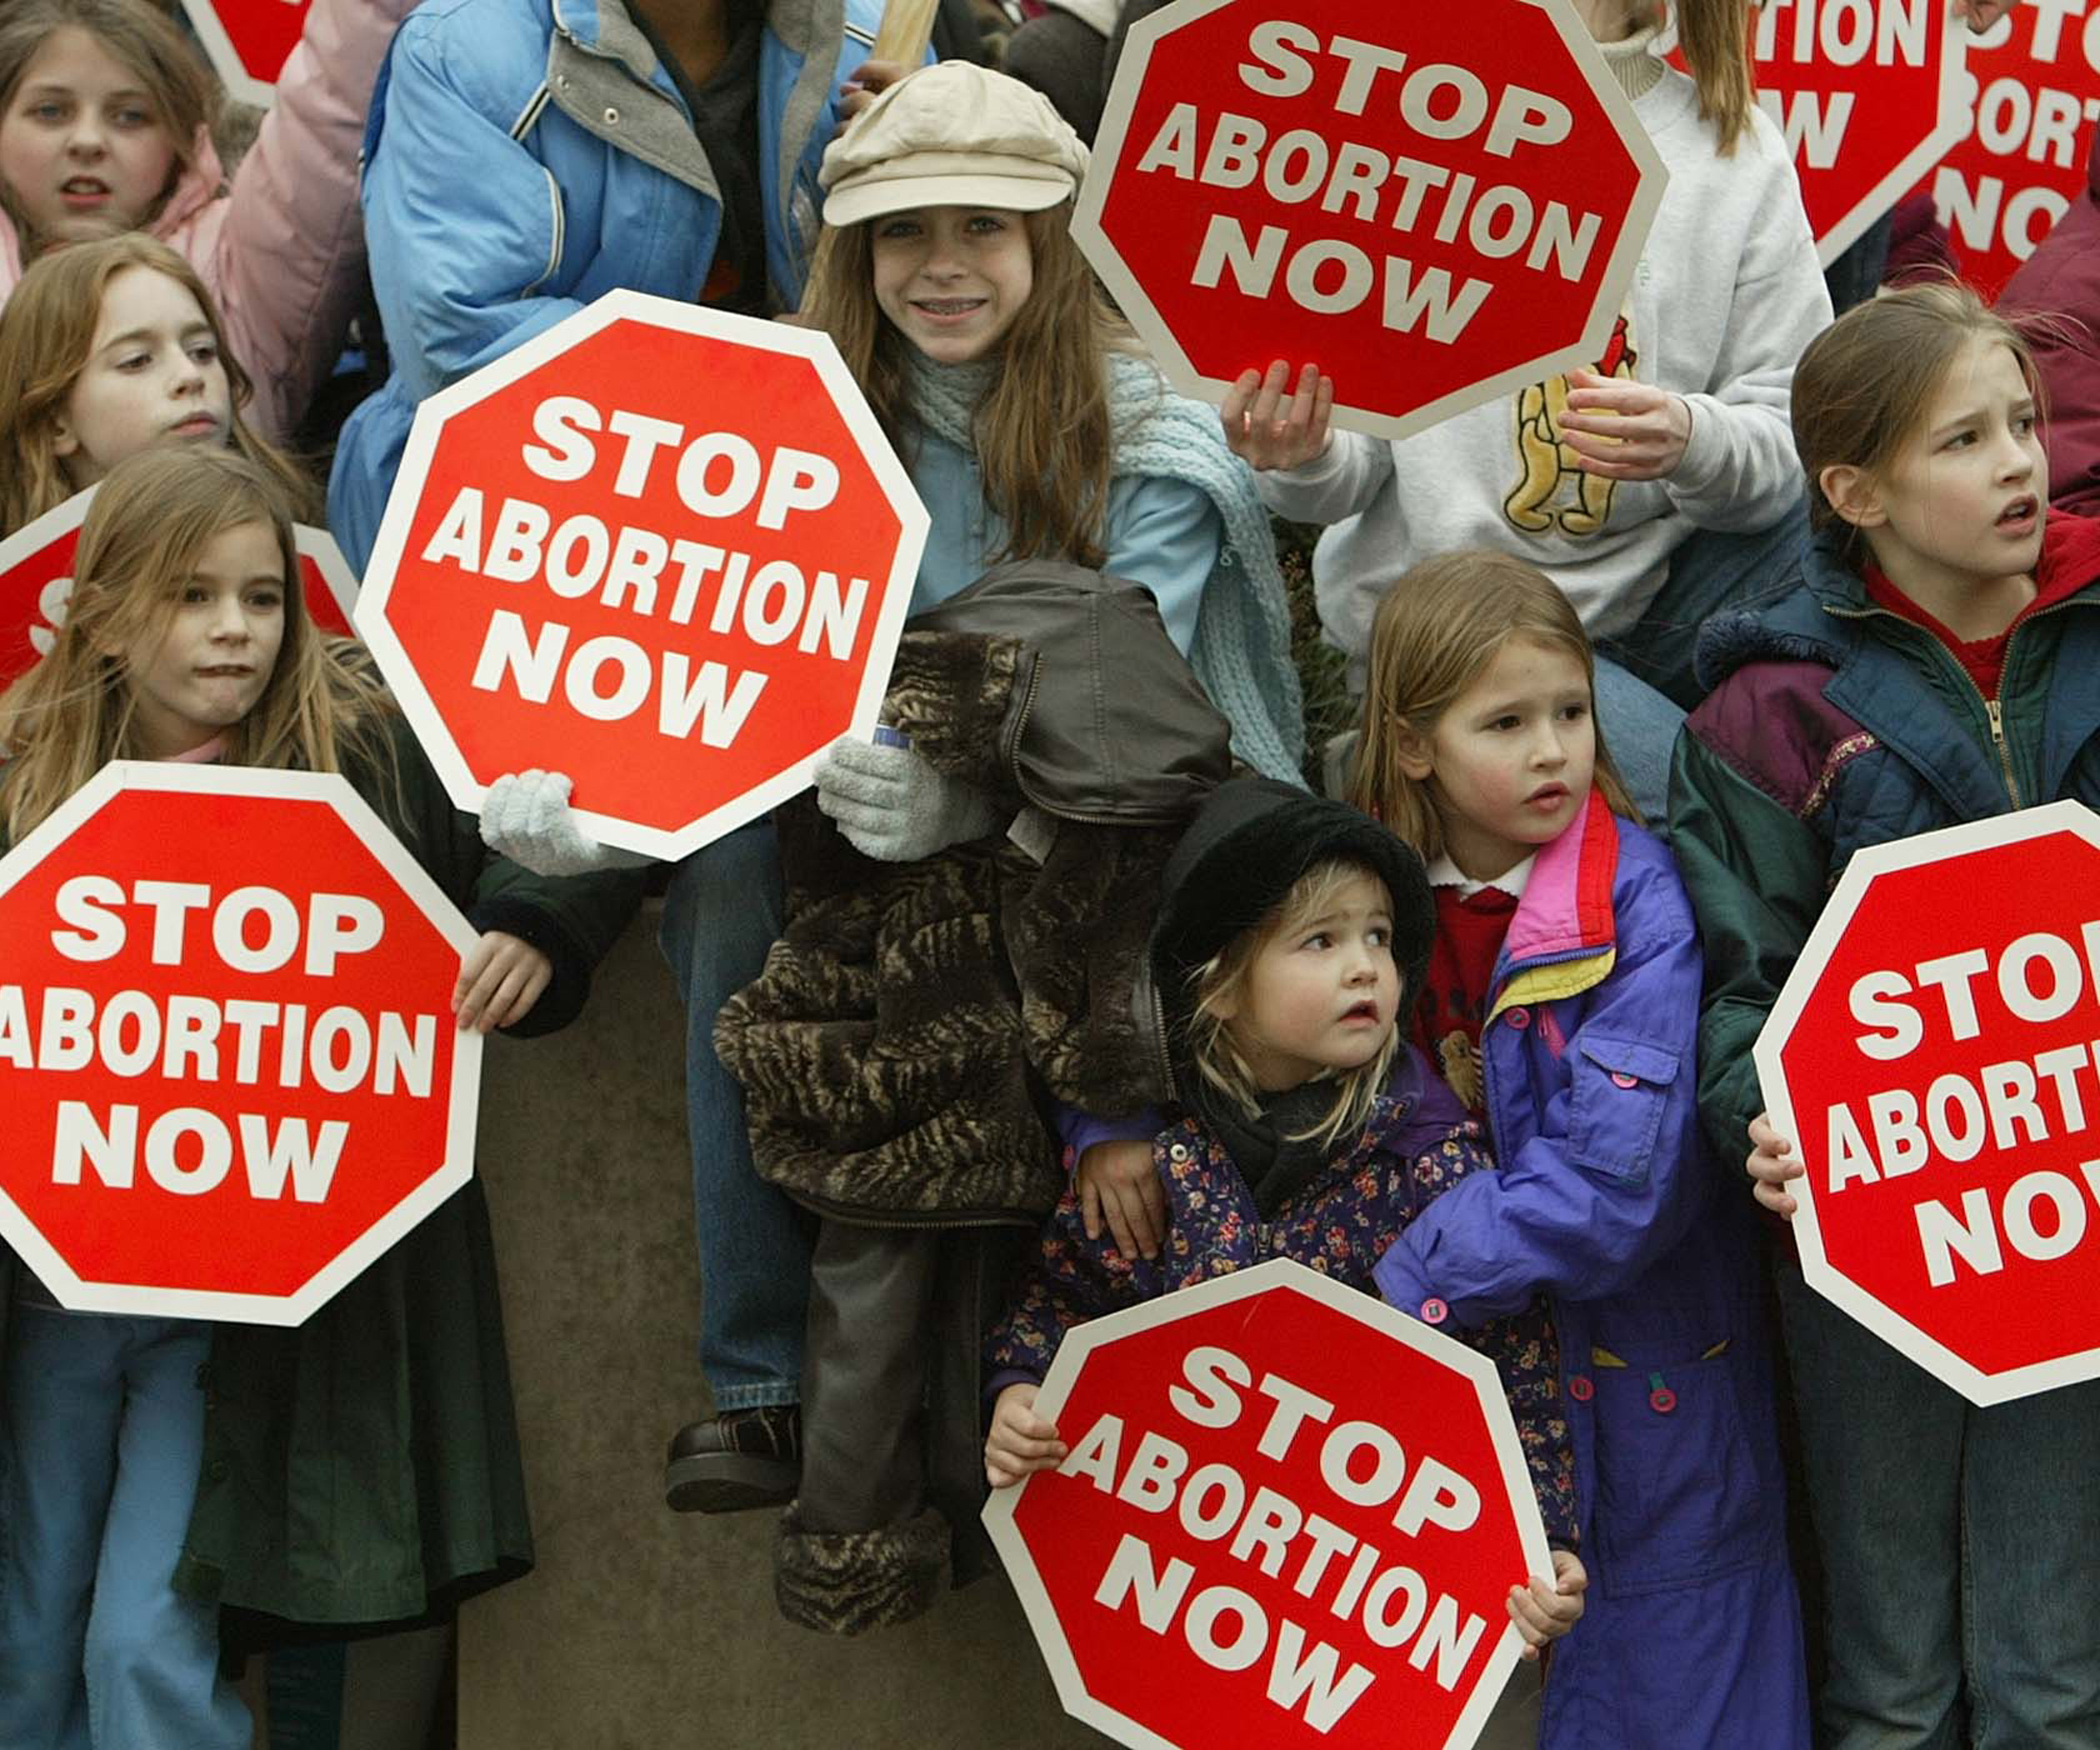 Melbourne abortion clinic fights to ban protesters